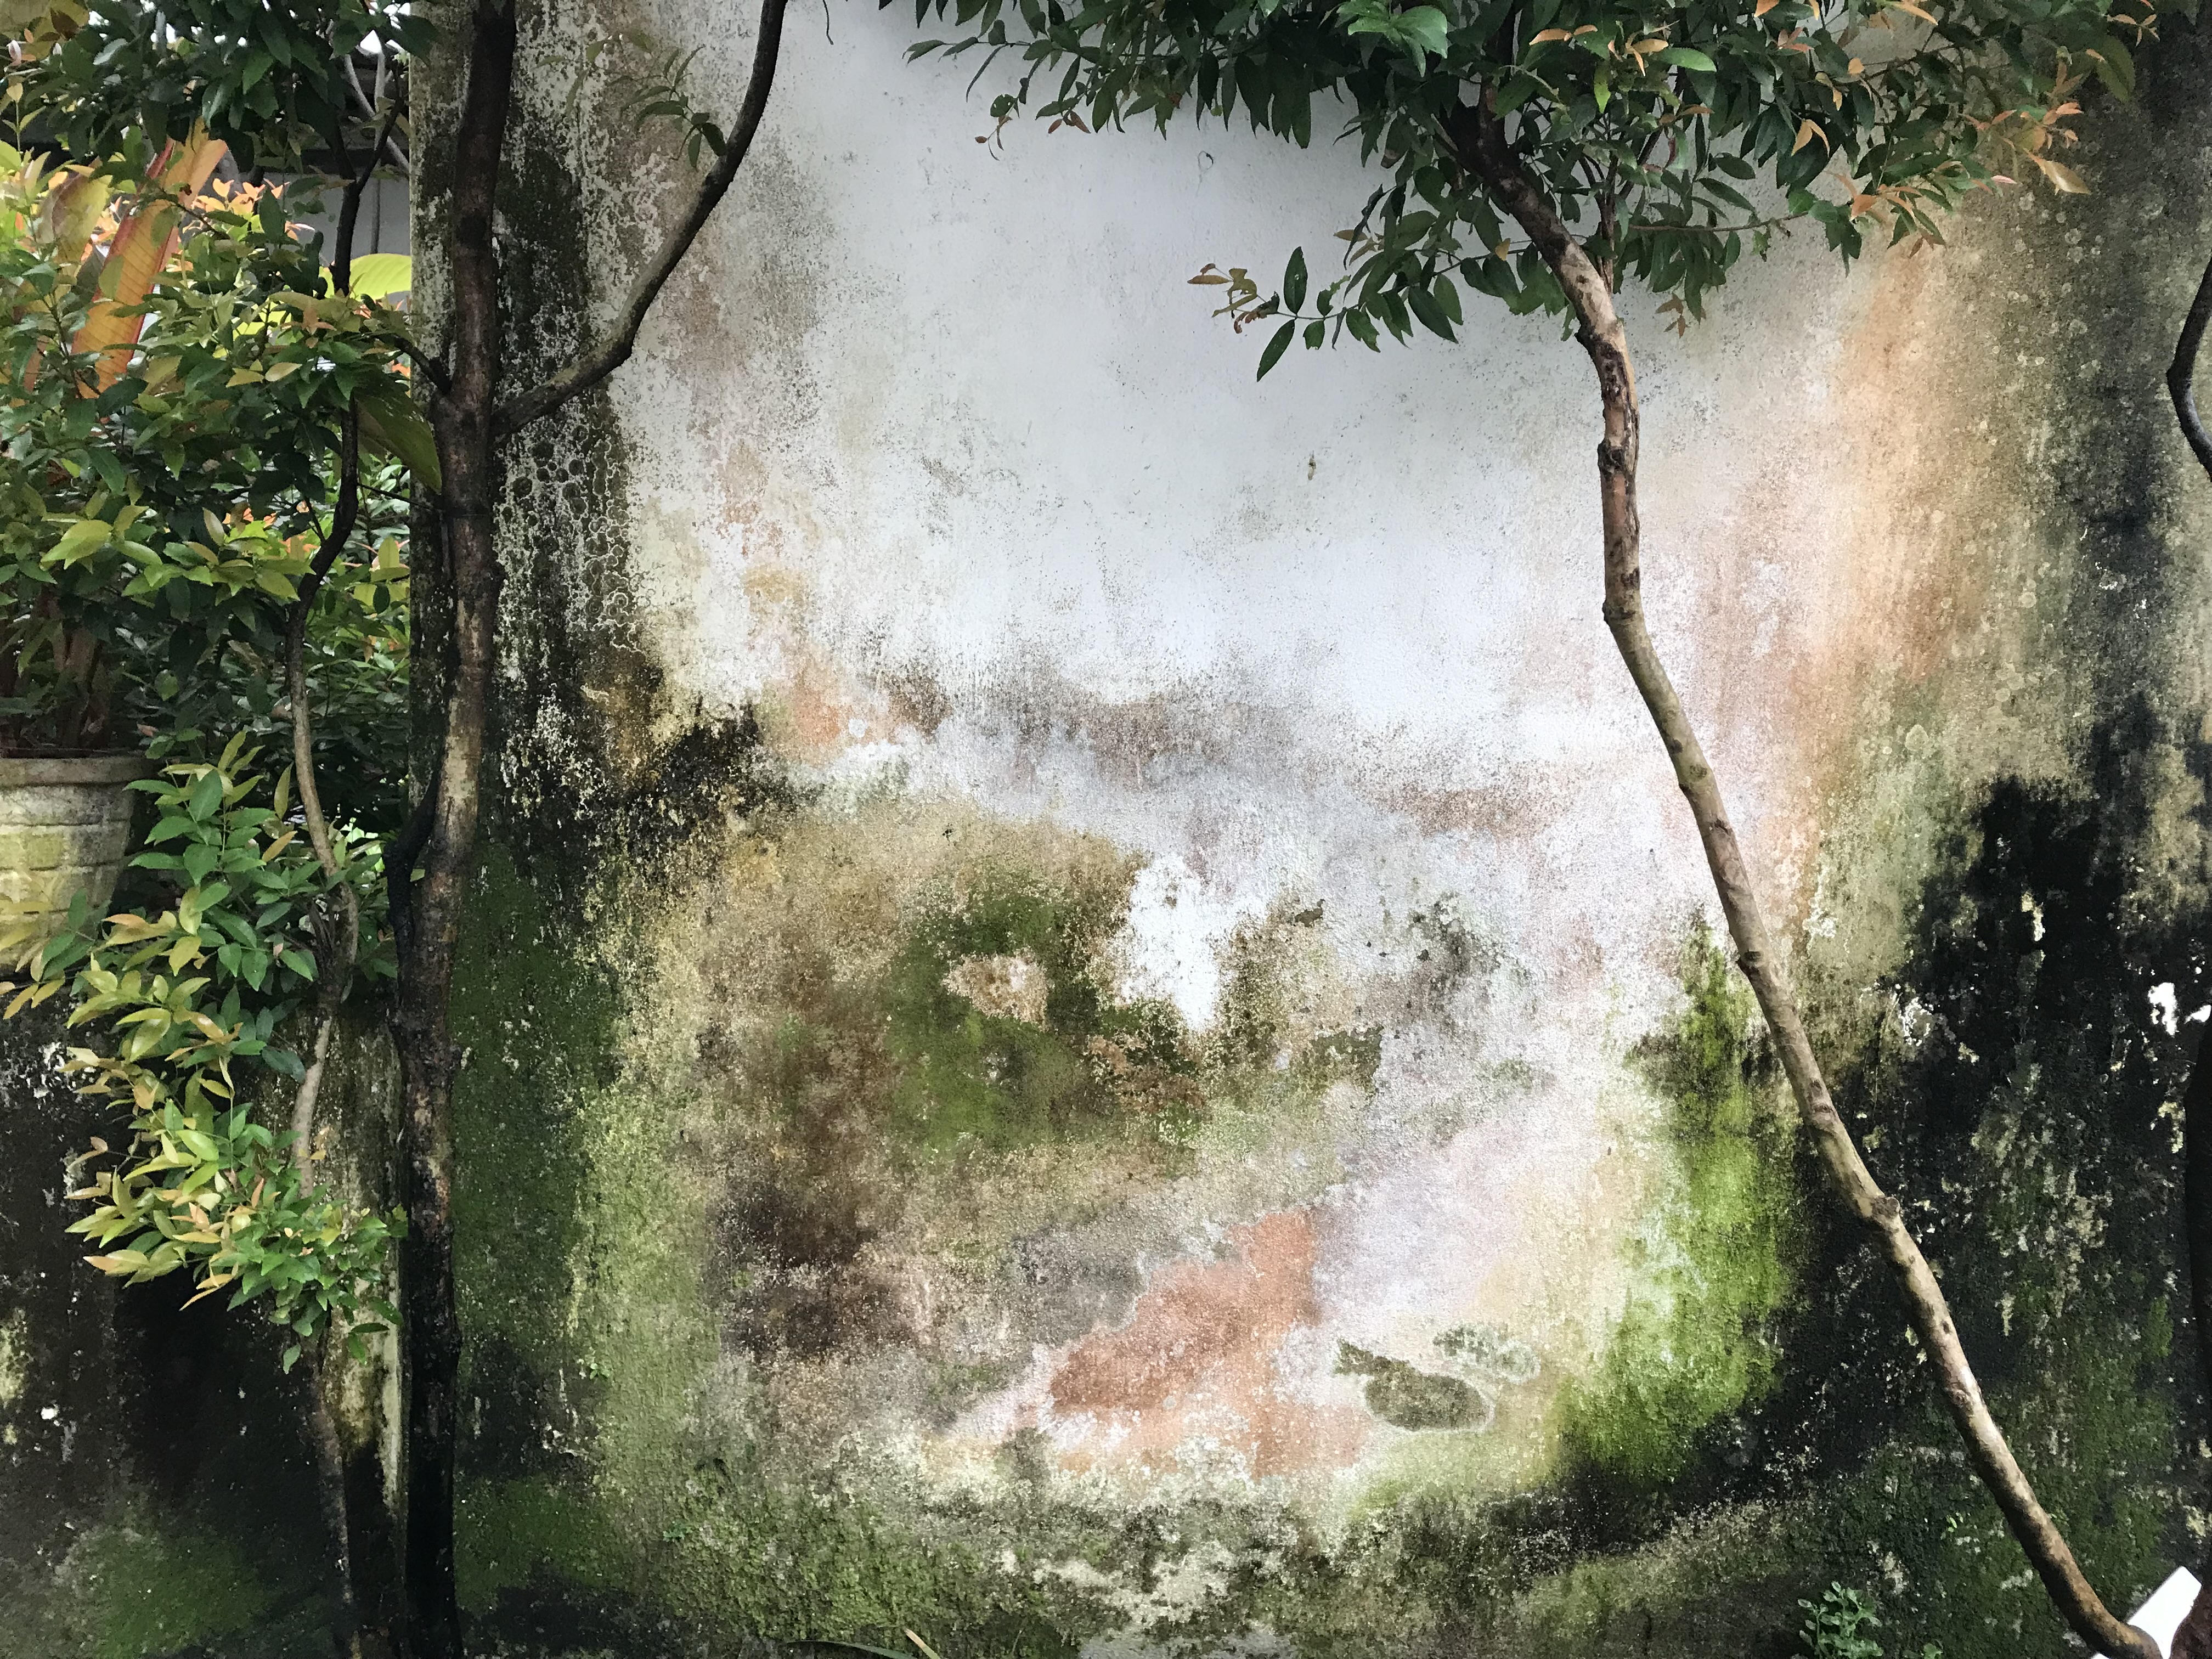 The tropics, distressed surfaces and haptic visuality